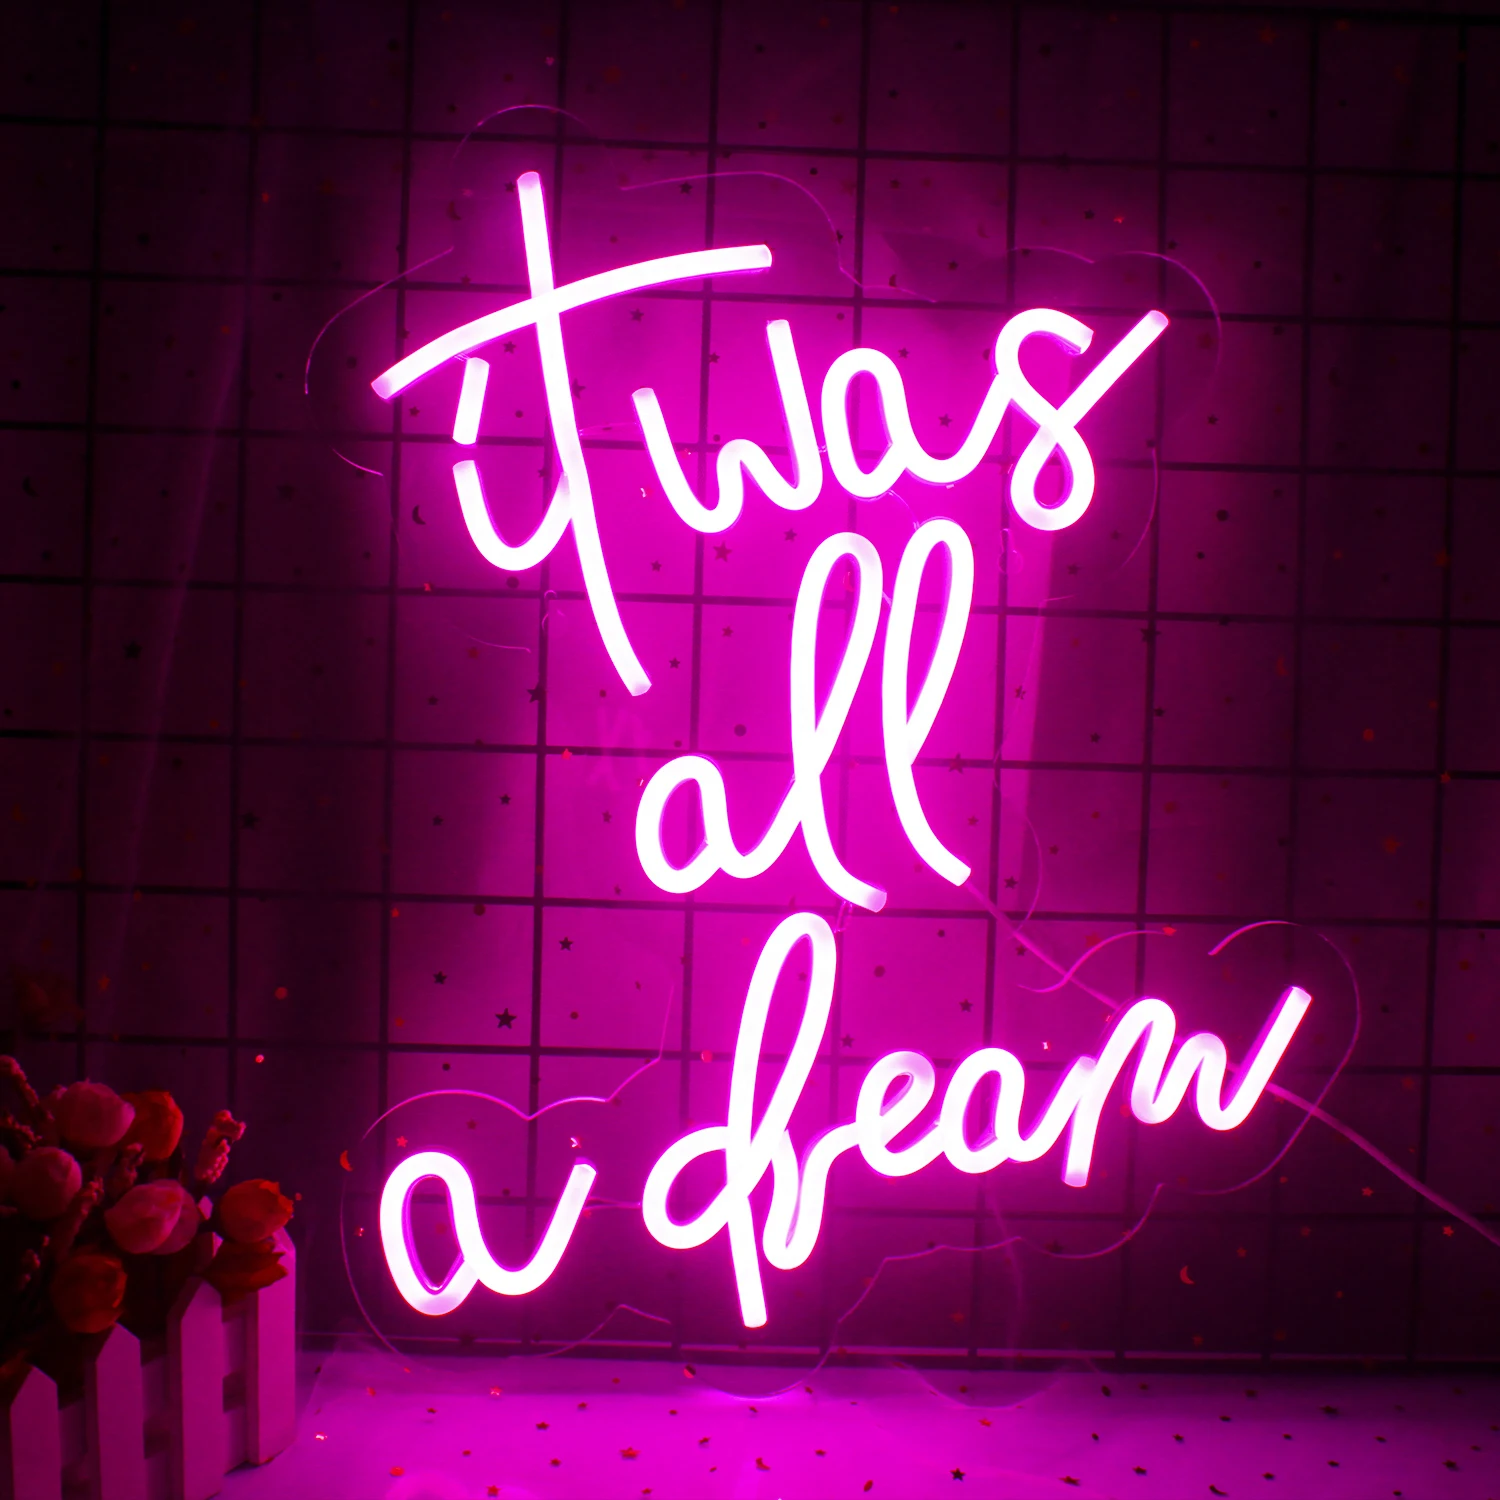 Ineonlife It Was of a Dream Neon Sign Custom Light Atmosphere LED Bedroom Shop Party Room Club Bar Home Wedding Wall Decoration